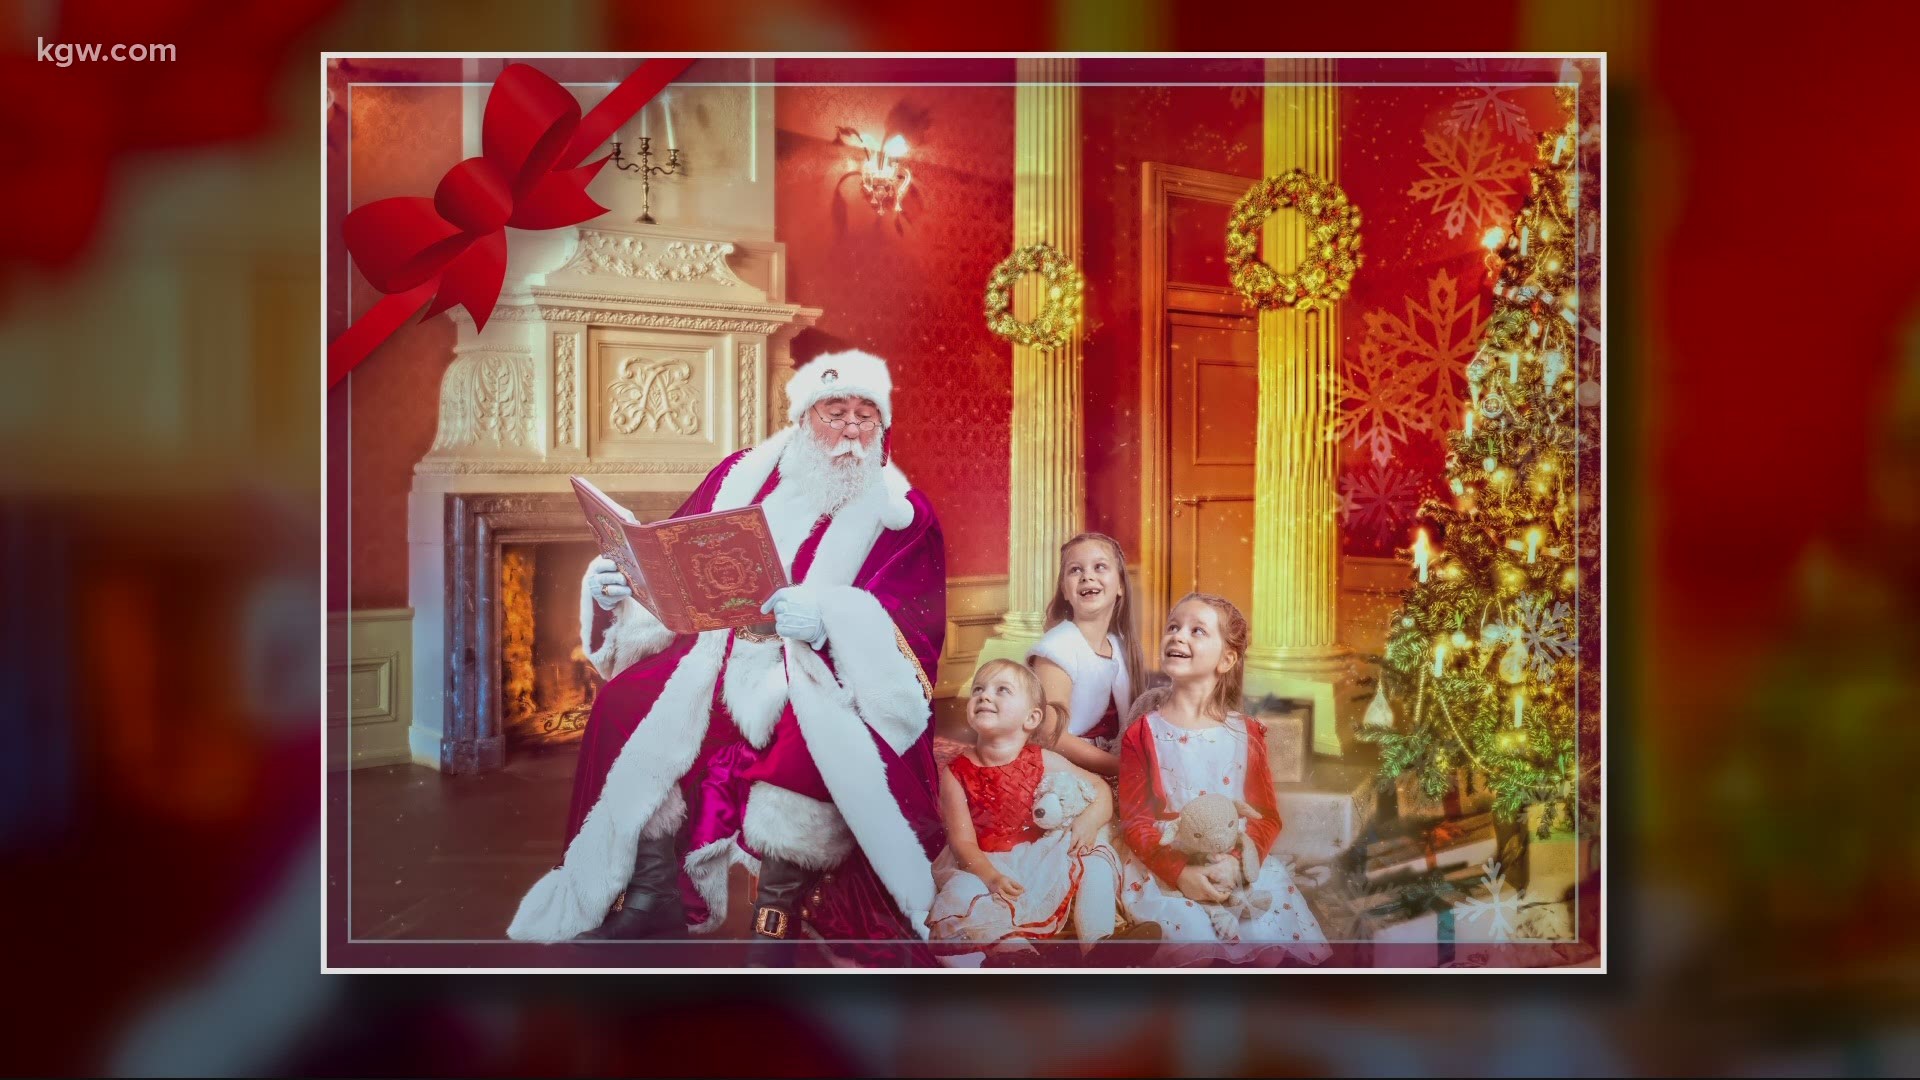 Justin Mikkelsen Photography is partnering with Santa Claus to create photoshopped photoshoots for kids, including a personalized letter from the big man in red.